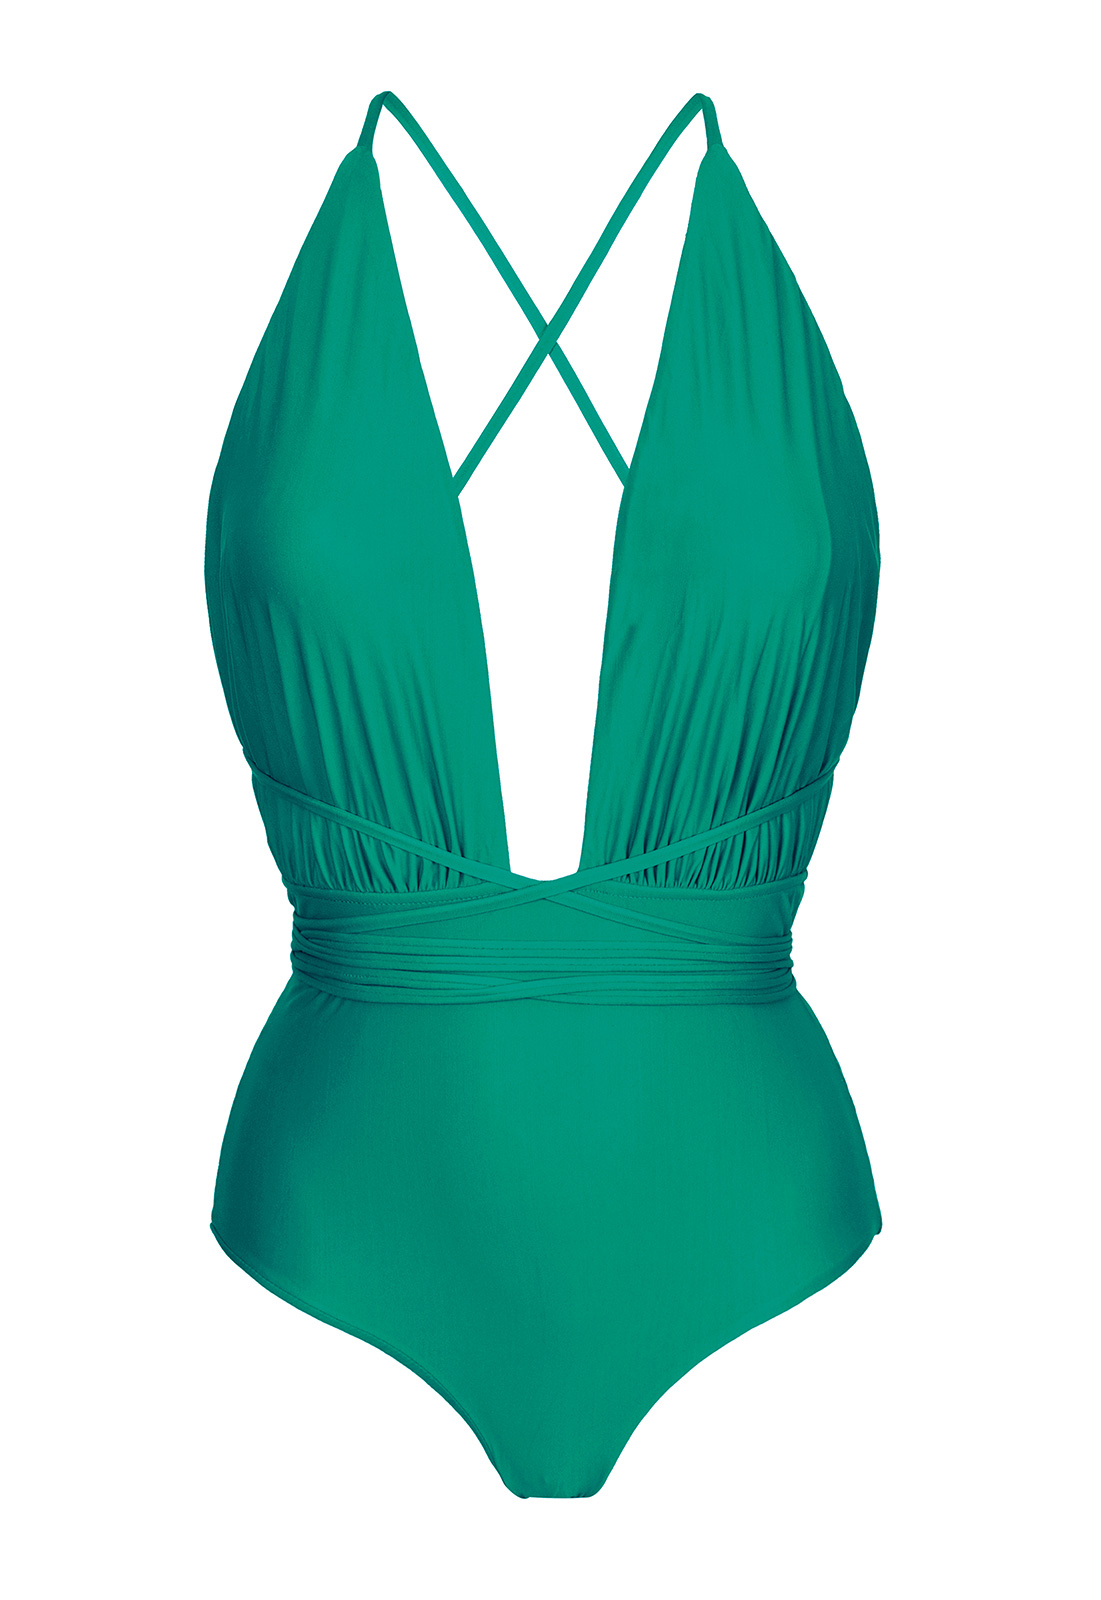 Green Plunging One-piece Swimsuit With Slim Back Crossed Straps - New ...